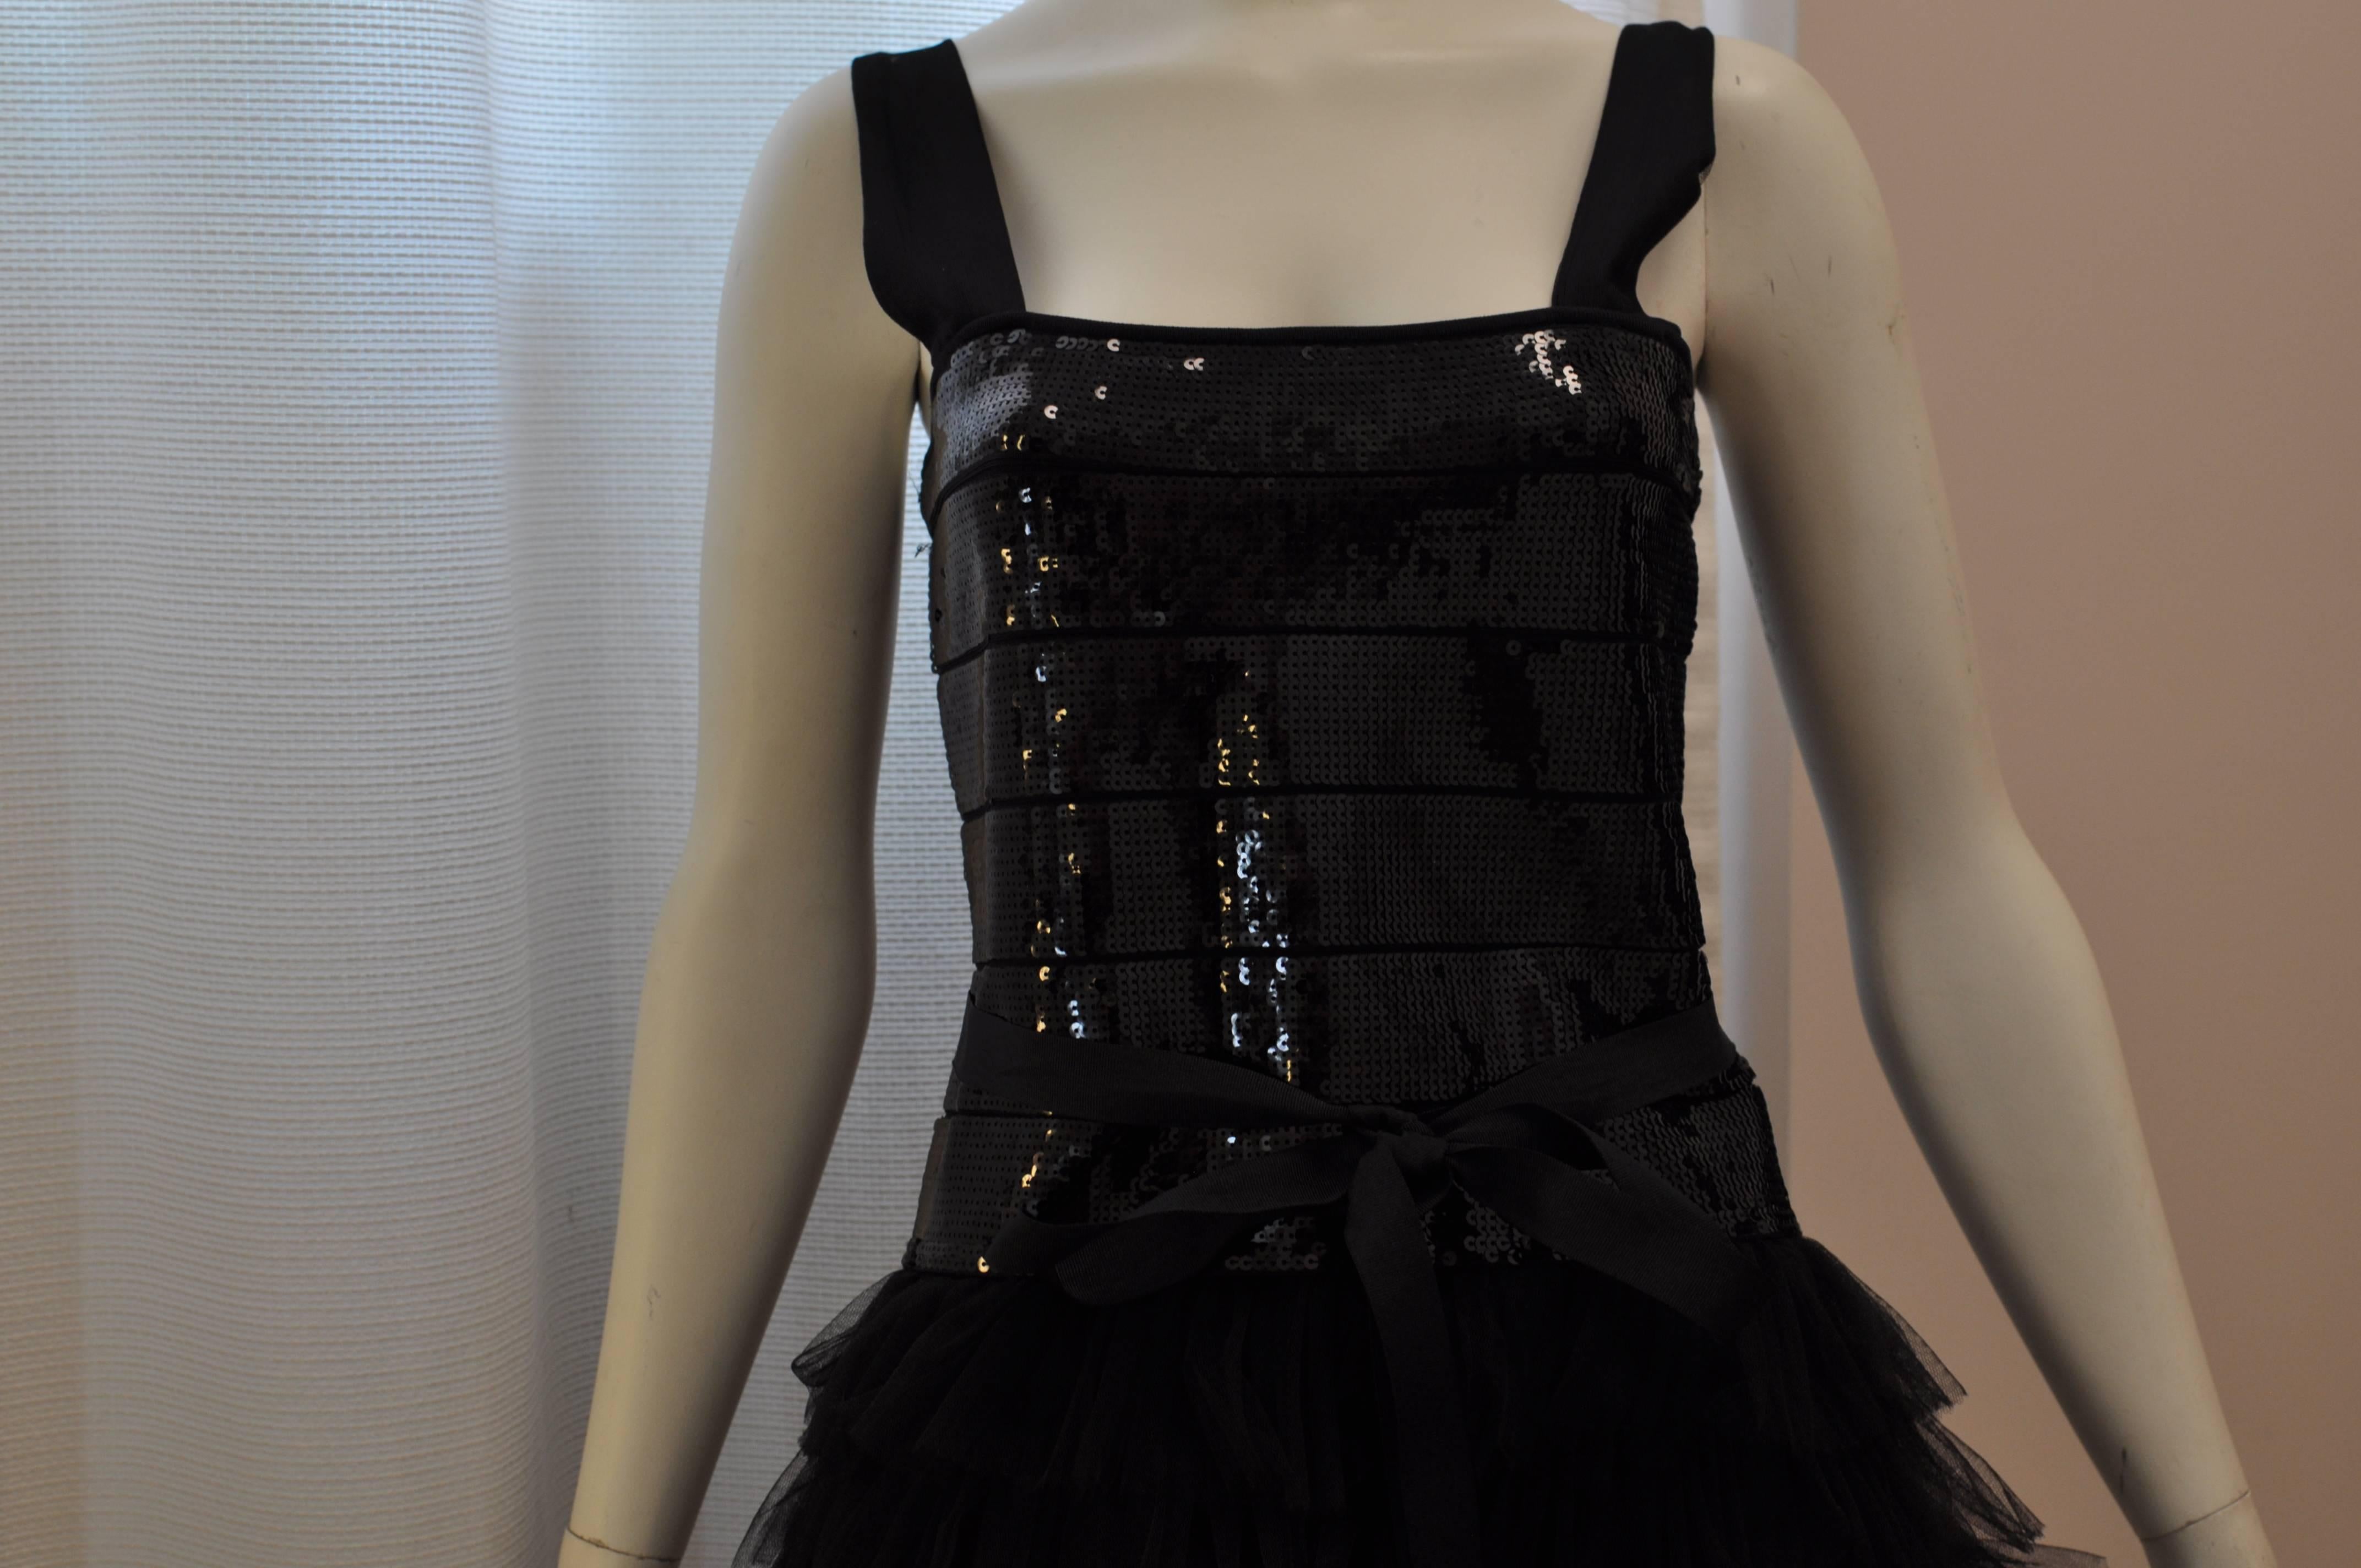 Striking dress with a sequin bodice and ruffled tulle skirt dress. There is a gros grain attached belt; a hidden zip closure center back and wide straps. The bodice is 90% rayon with rest nylon and spandex. The tulle skirt is made of polyester.